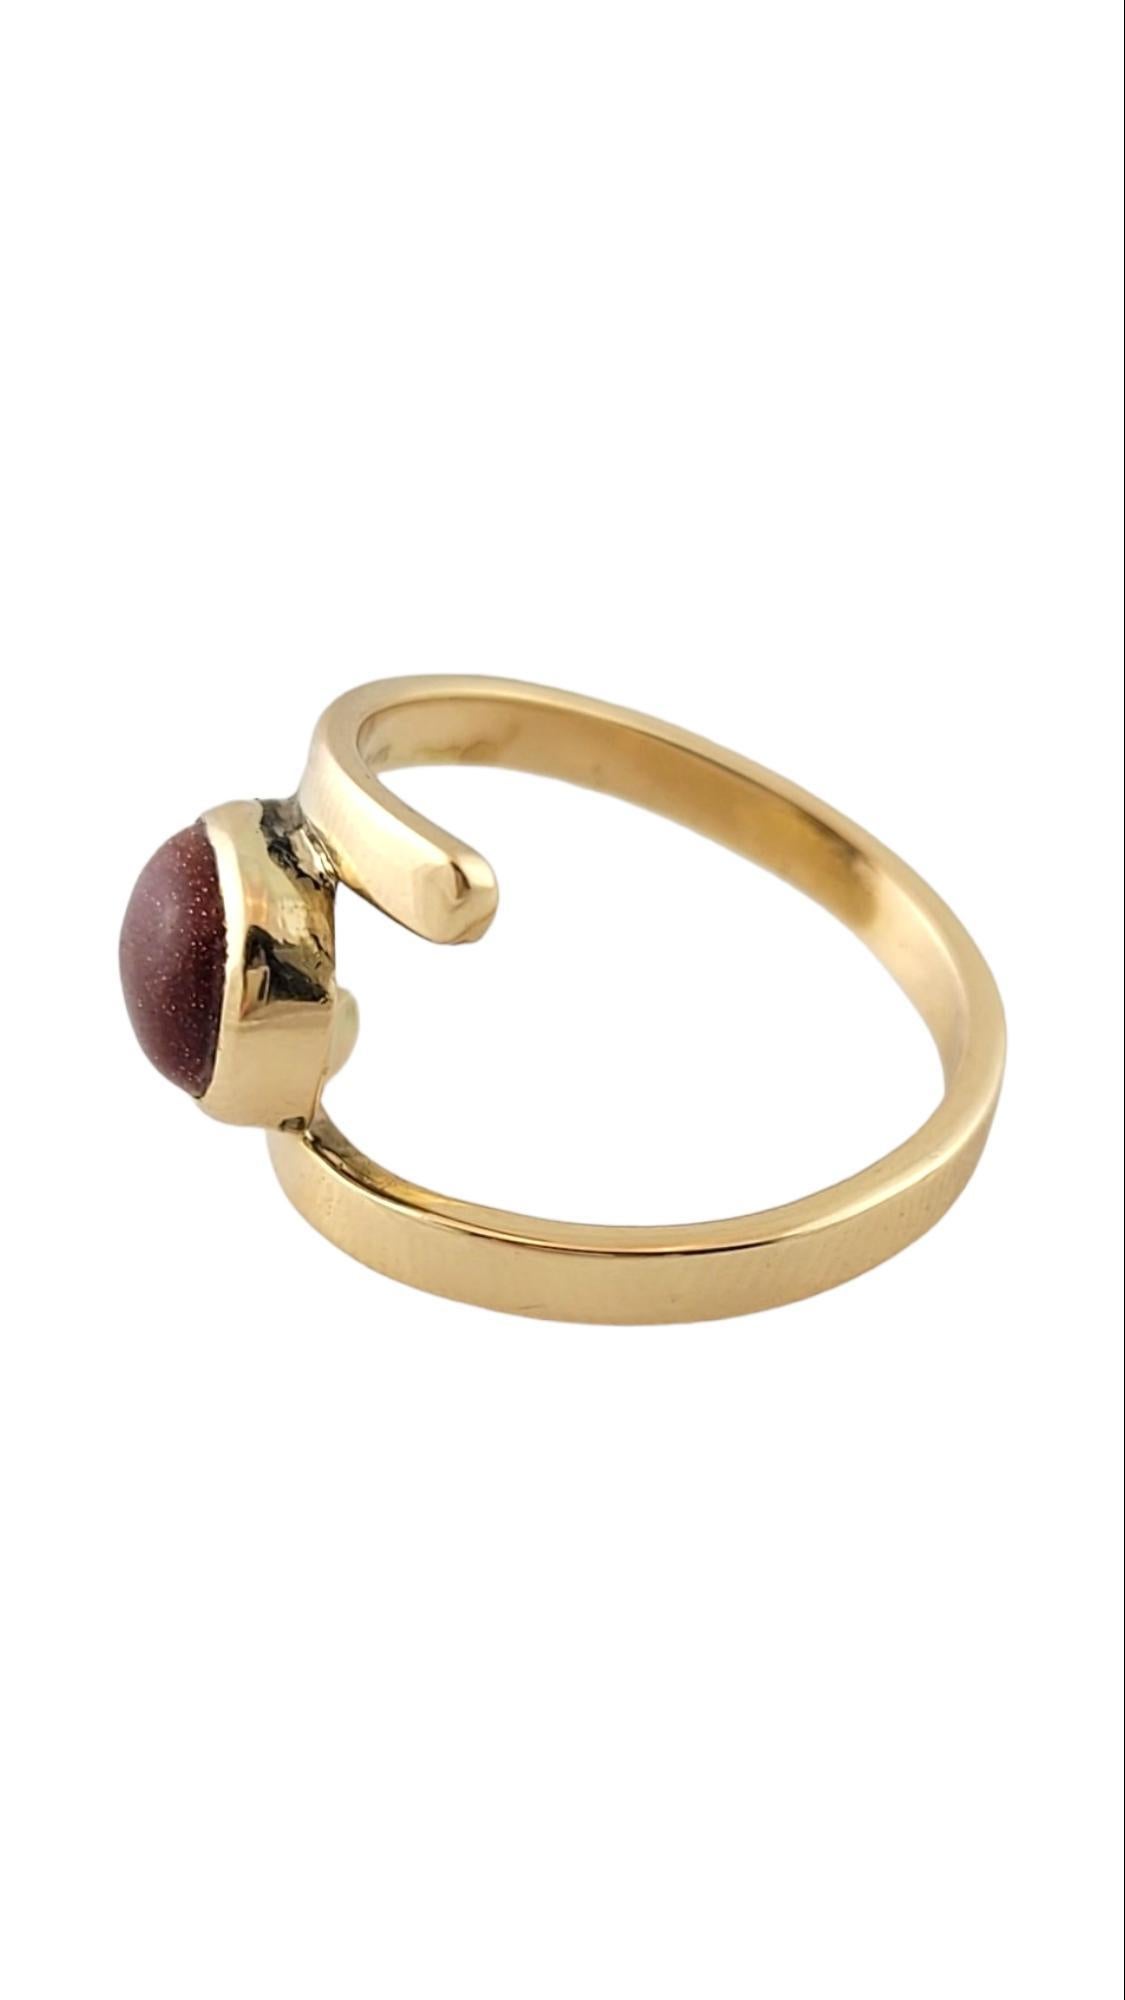 14IK Yellow Gold Goldstone Ring Size 5.5

This gorgeous ring is crafted from 14K yellow gold and features a beautiful goldstone glass cabachon stone in the center!

Ring size: 5.5
Shank: 2.4mm 
Front: 11.6mm

Weight: 3.31 g/ 2.1 dwt

Tested